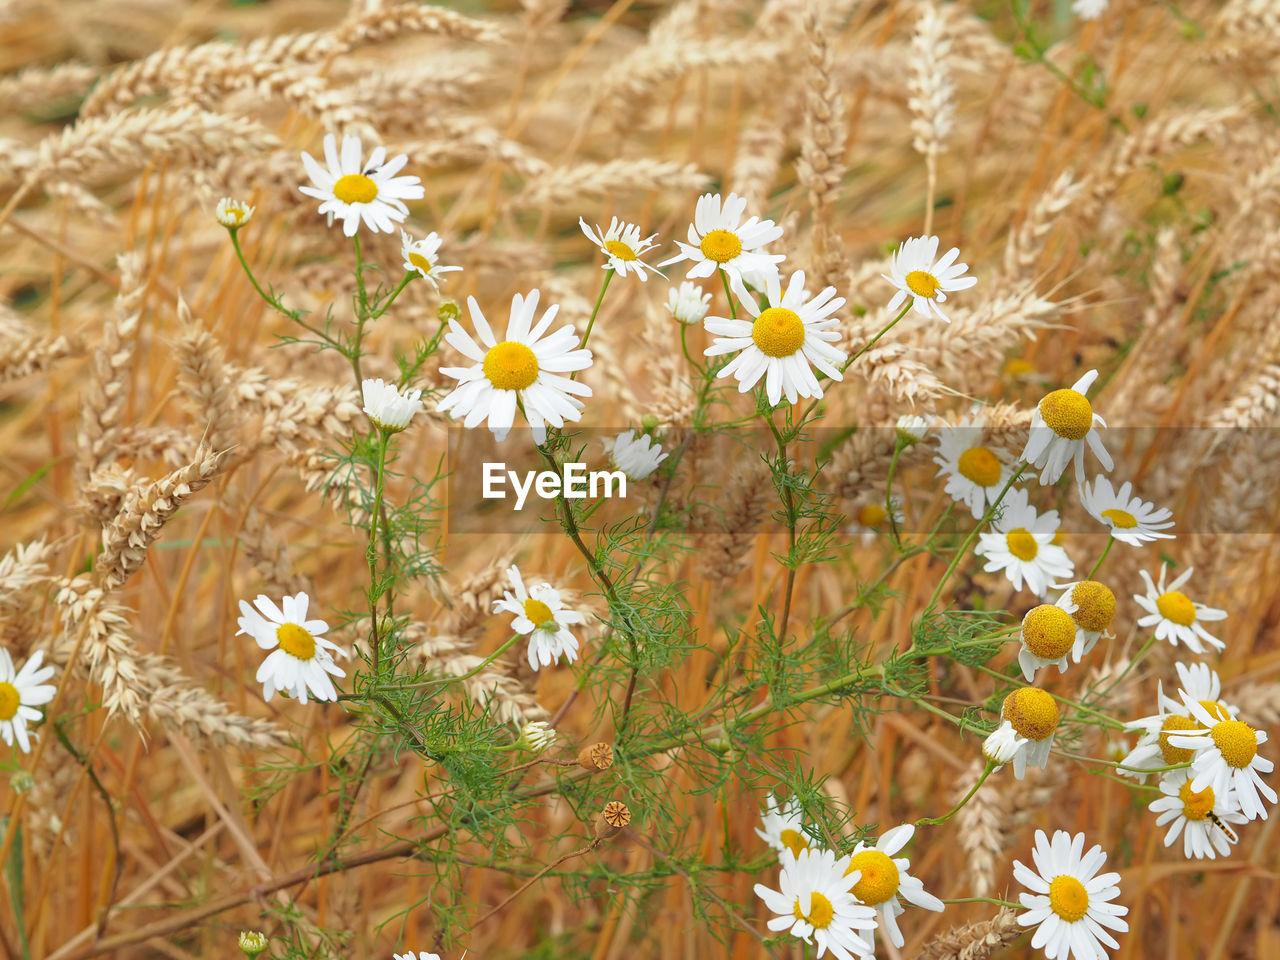 High angle view of daisy flowers growing on wheat field